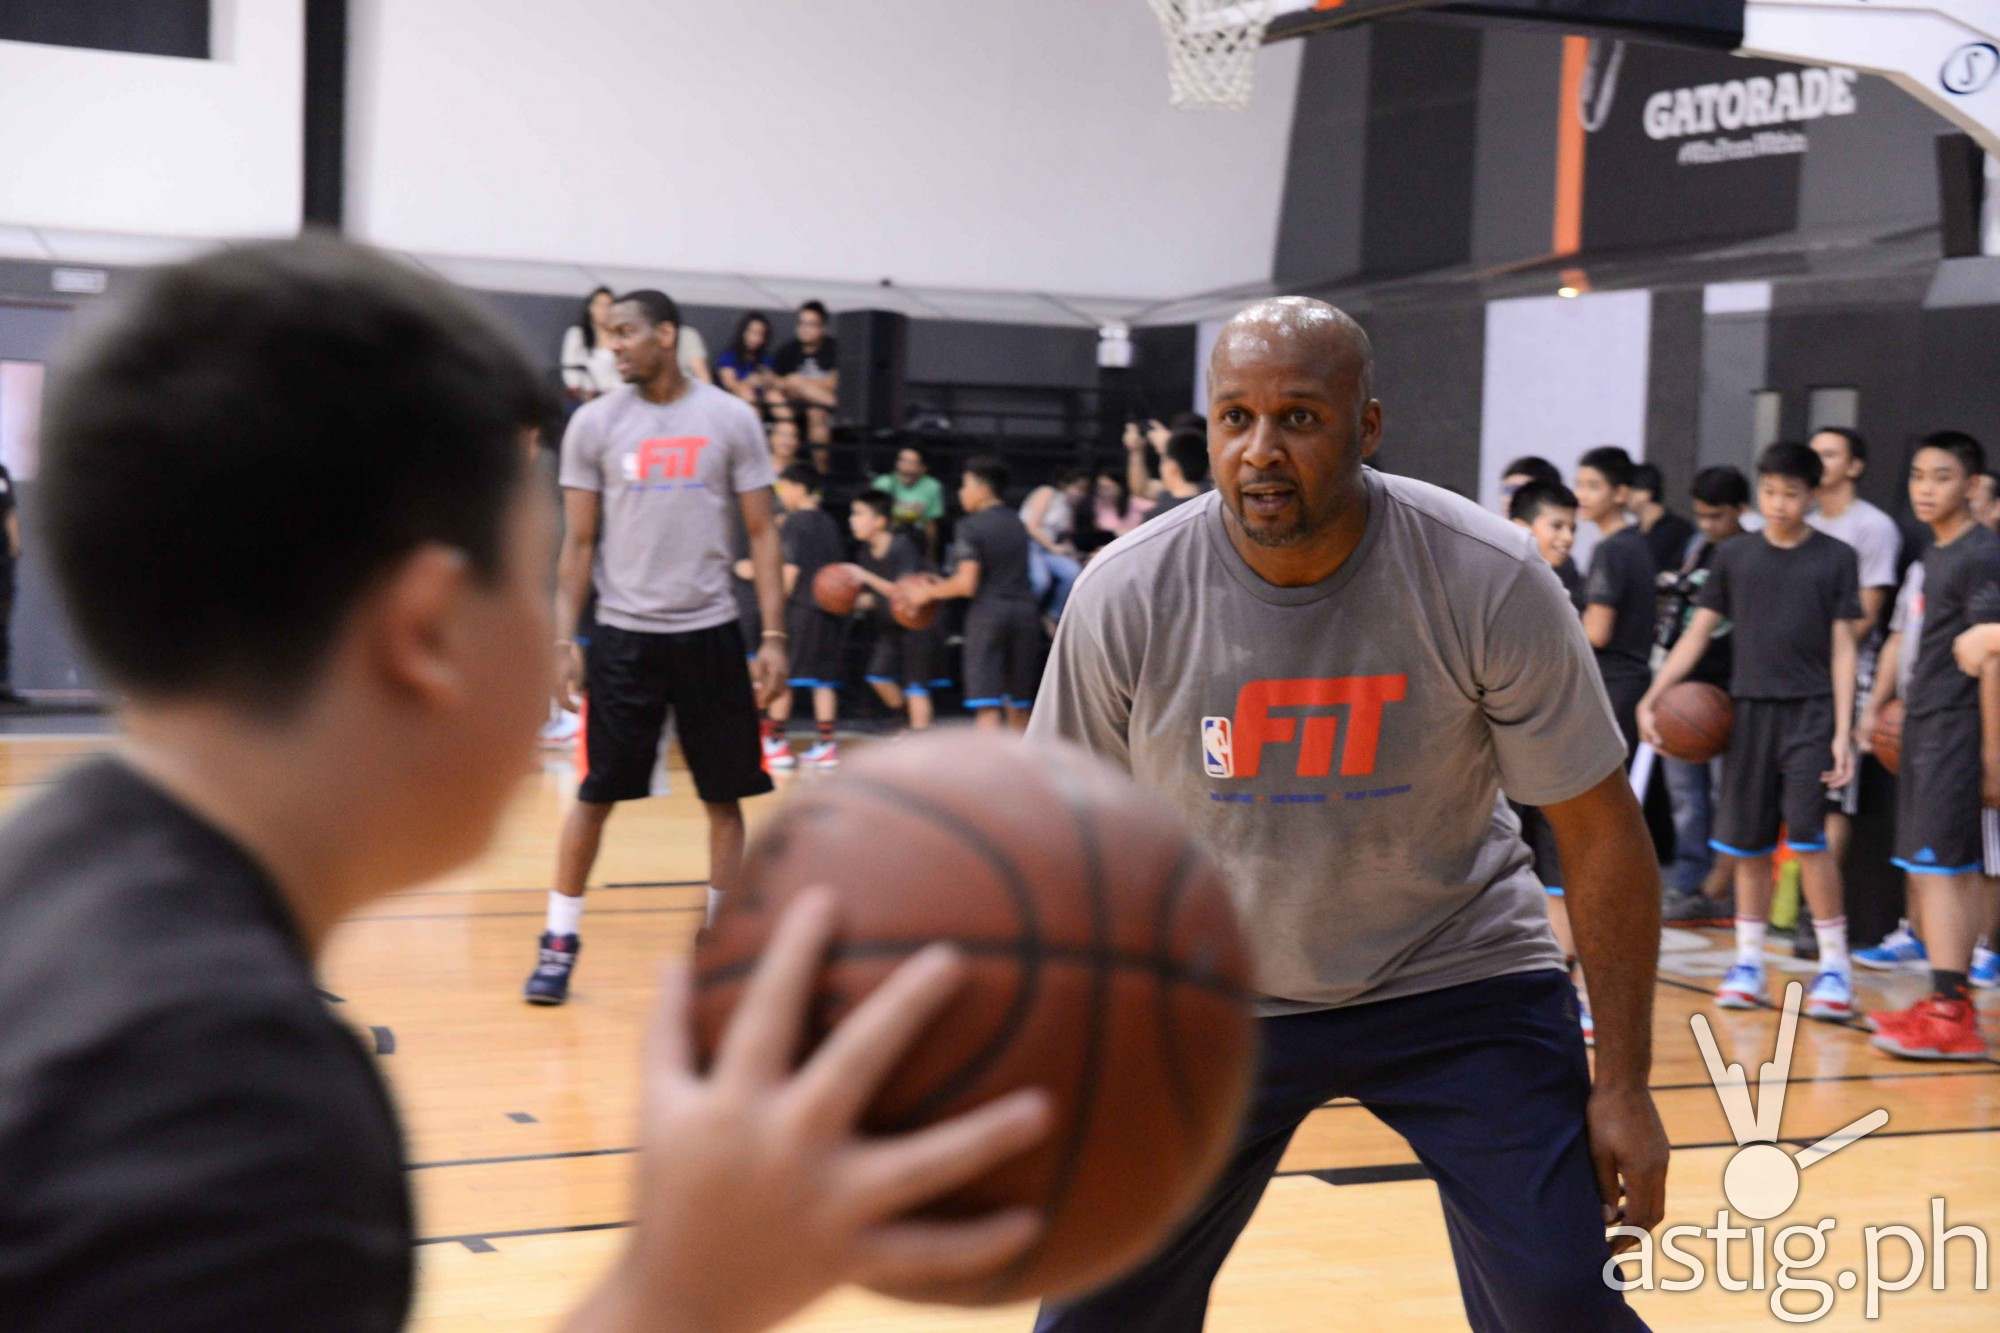 Partnering with NBA FIT, adidas Nations aims to develop the rich basketball talent in the country by giving young basketball players aged 13 years old and below a chance to participate in a basketball training camp